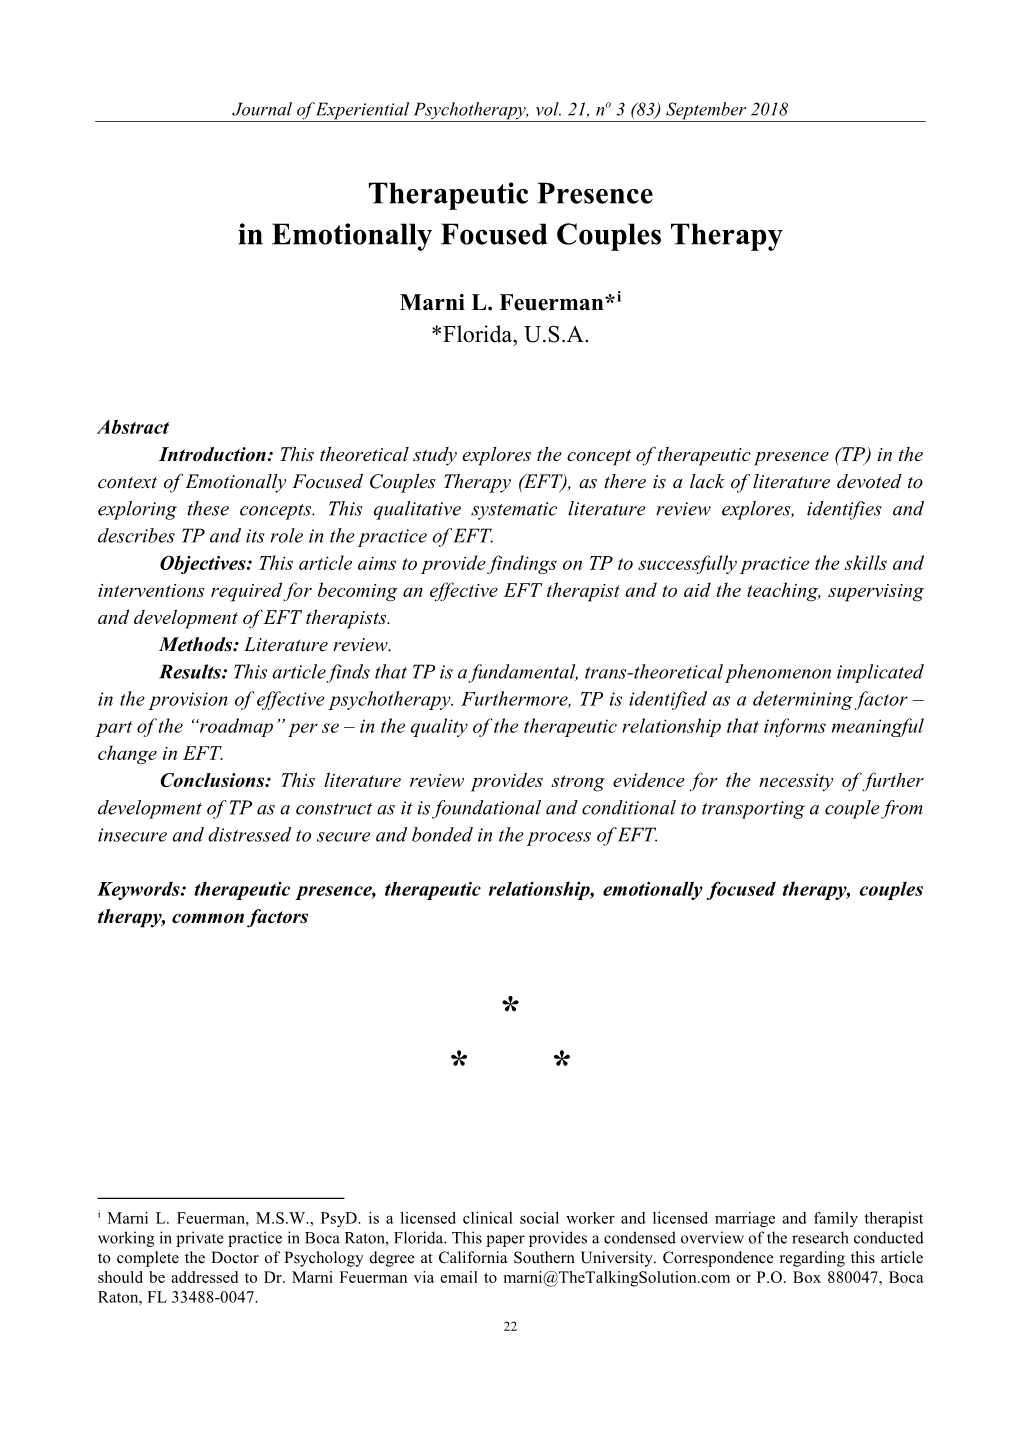 Therapeutic Presence in Emotionally Focused Couples Therapy